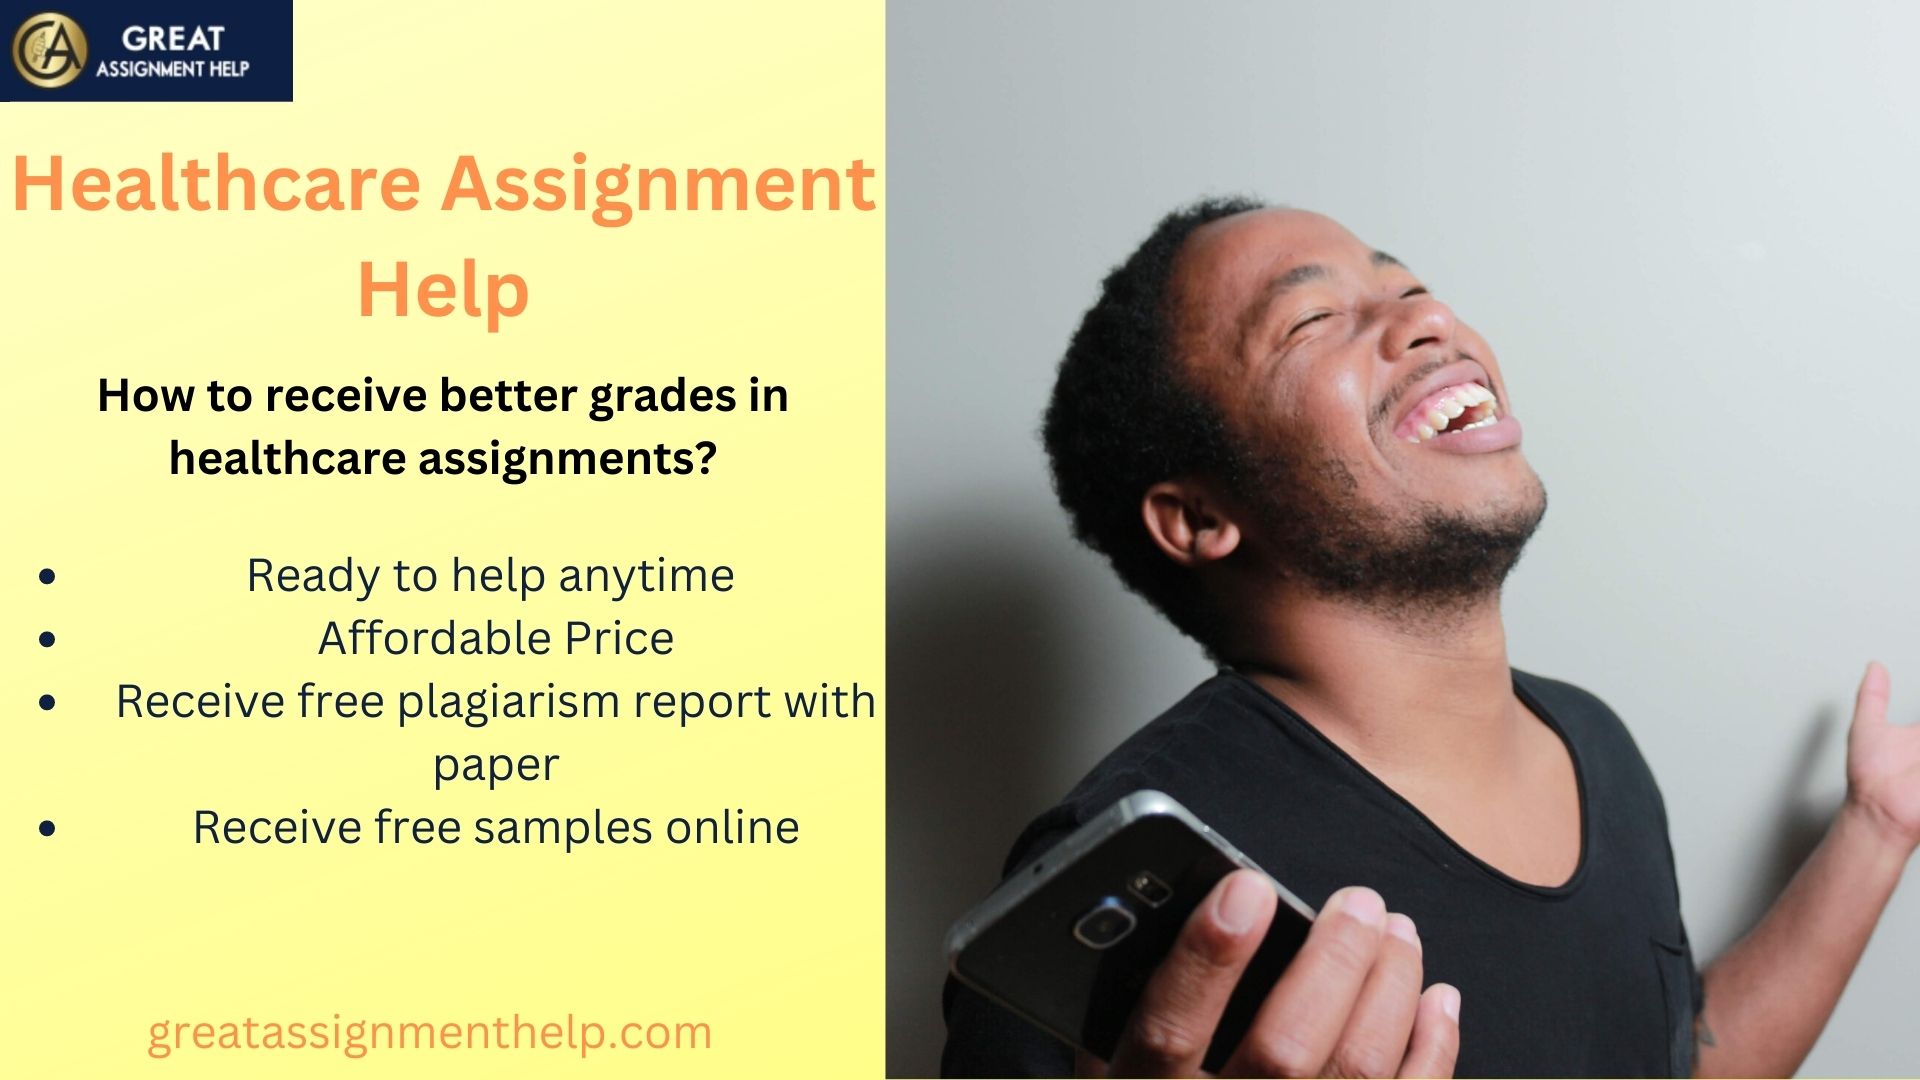 How to receive better grades in healthcare assignments?